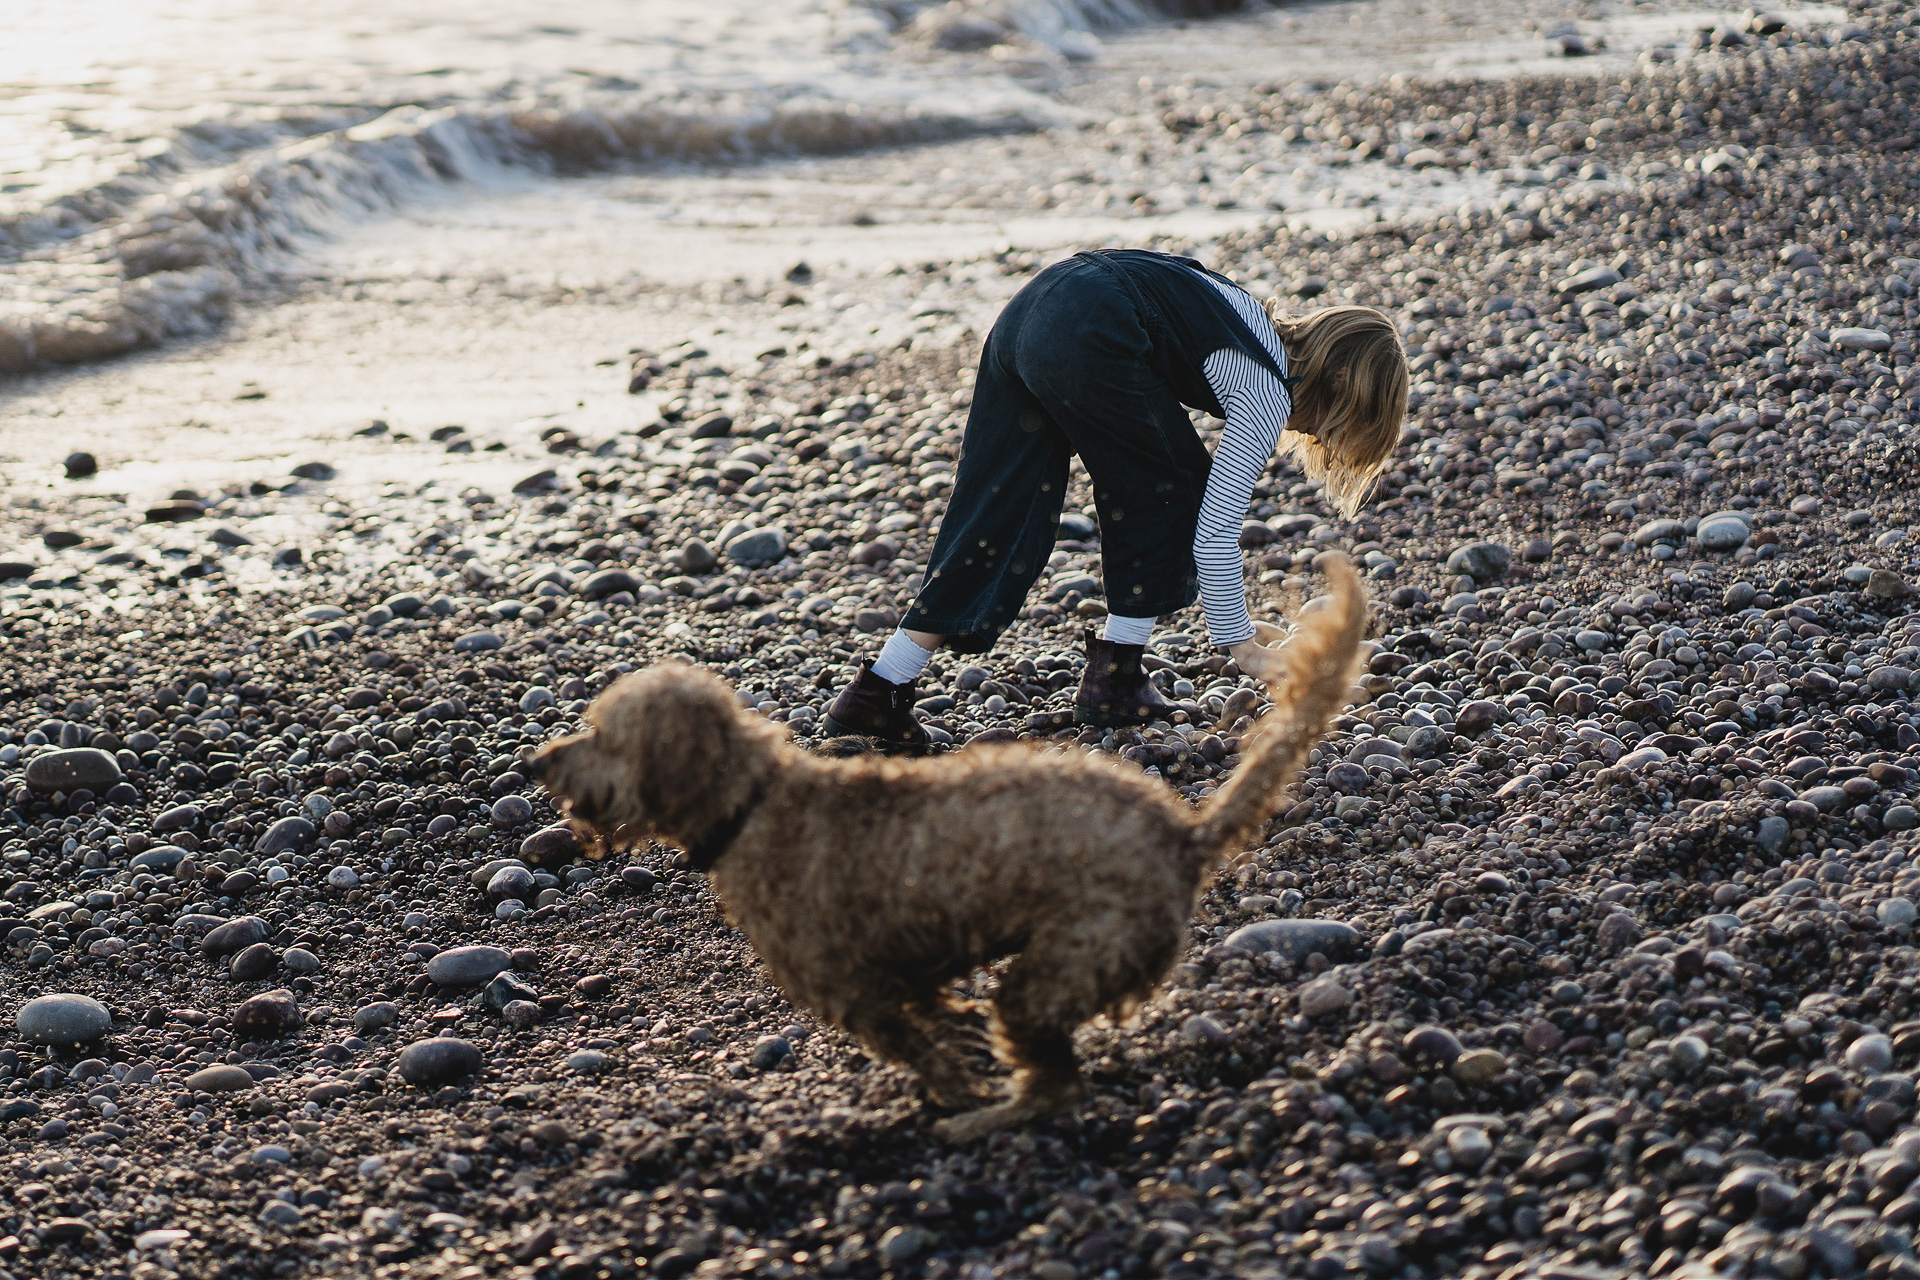 A girl picking up pebbles on the beach with a dog running past